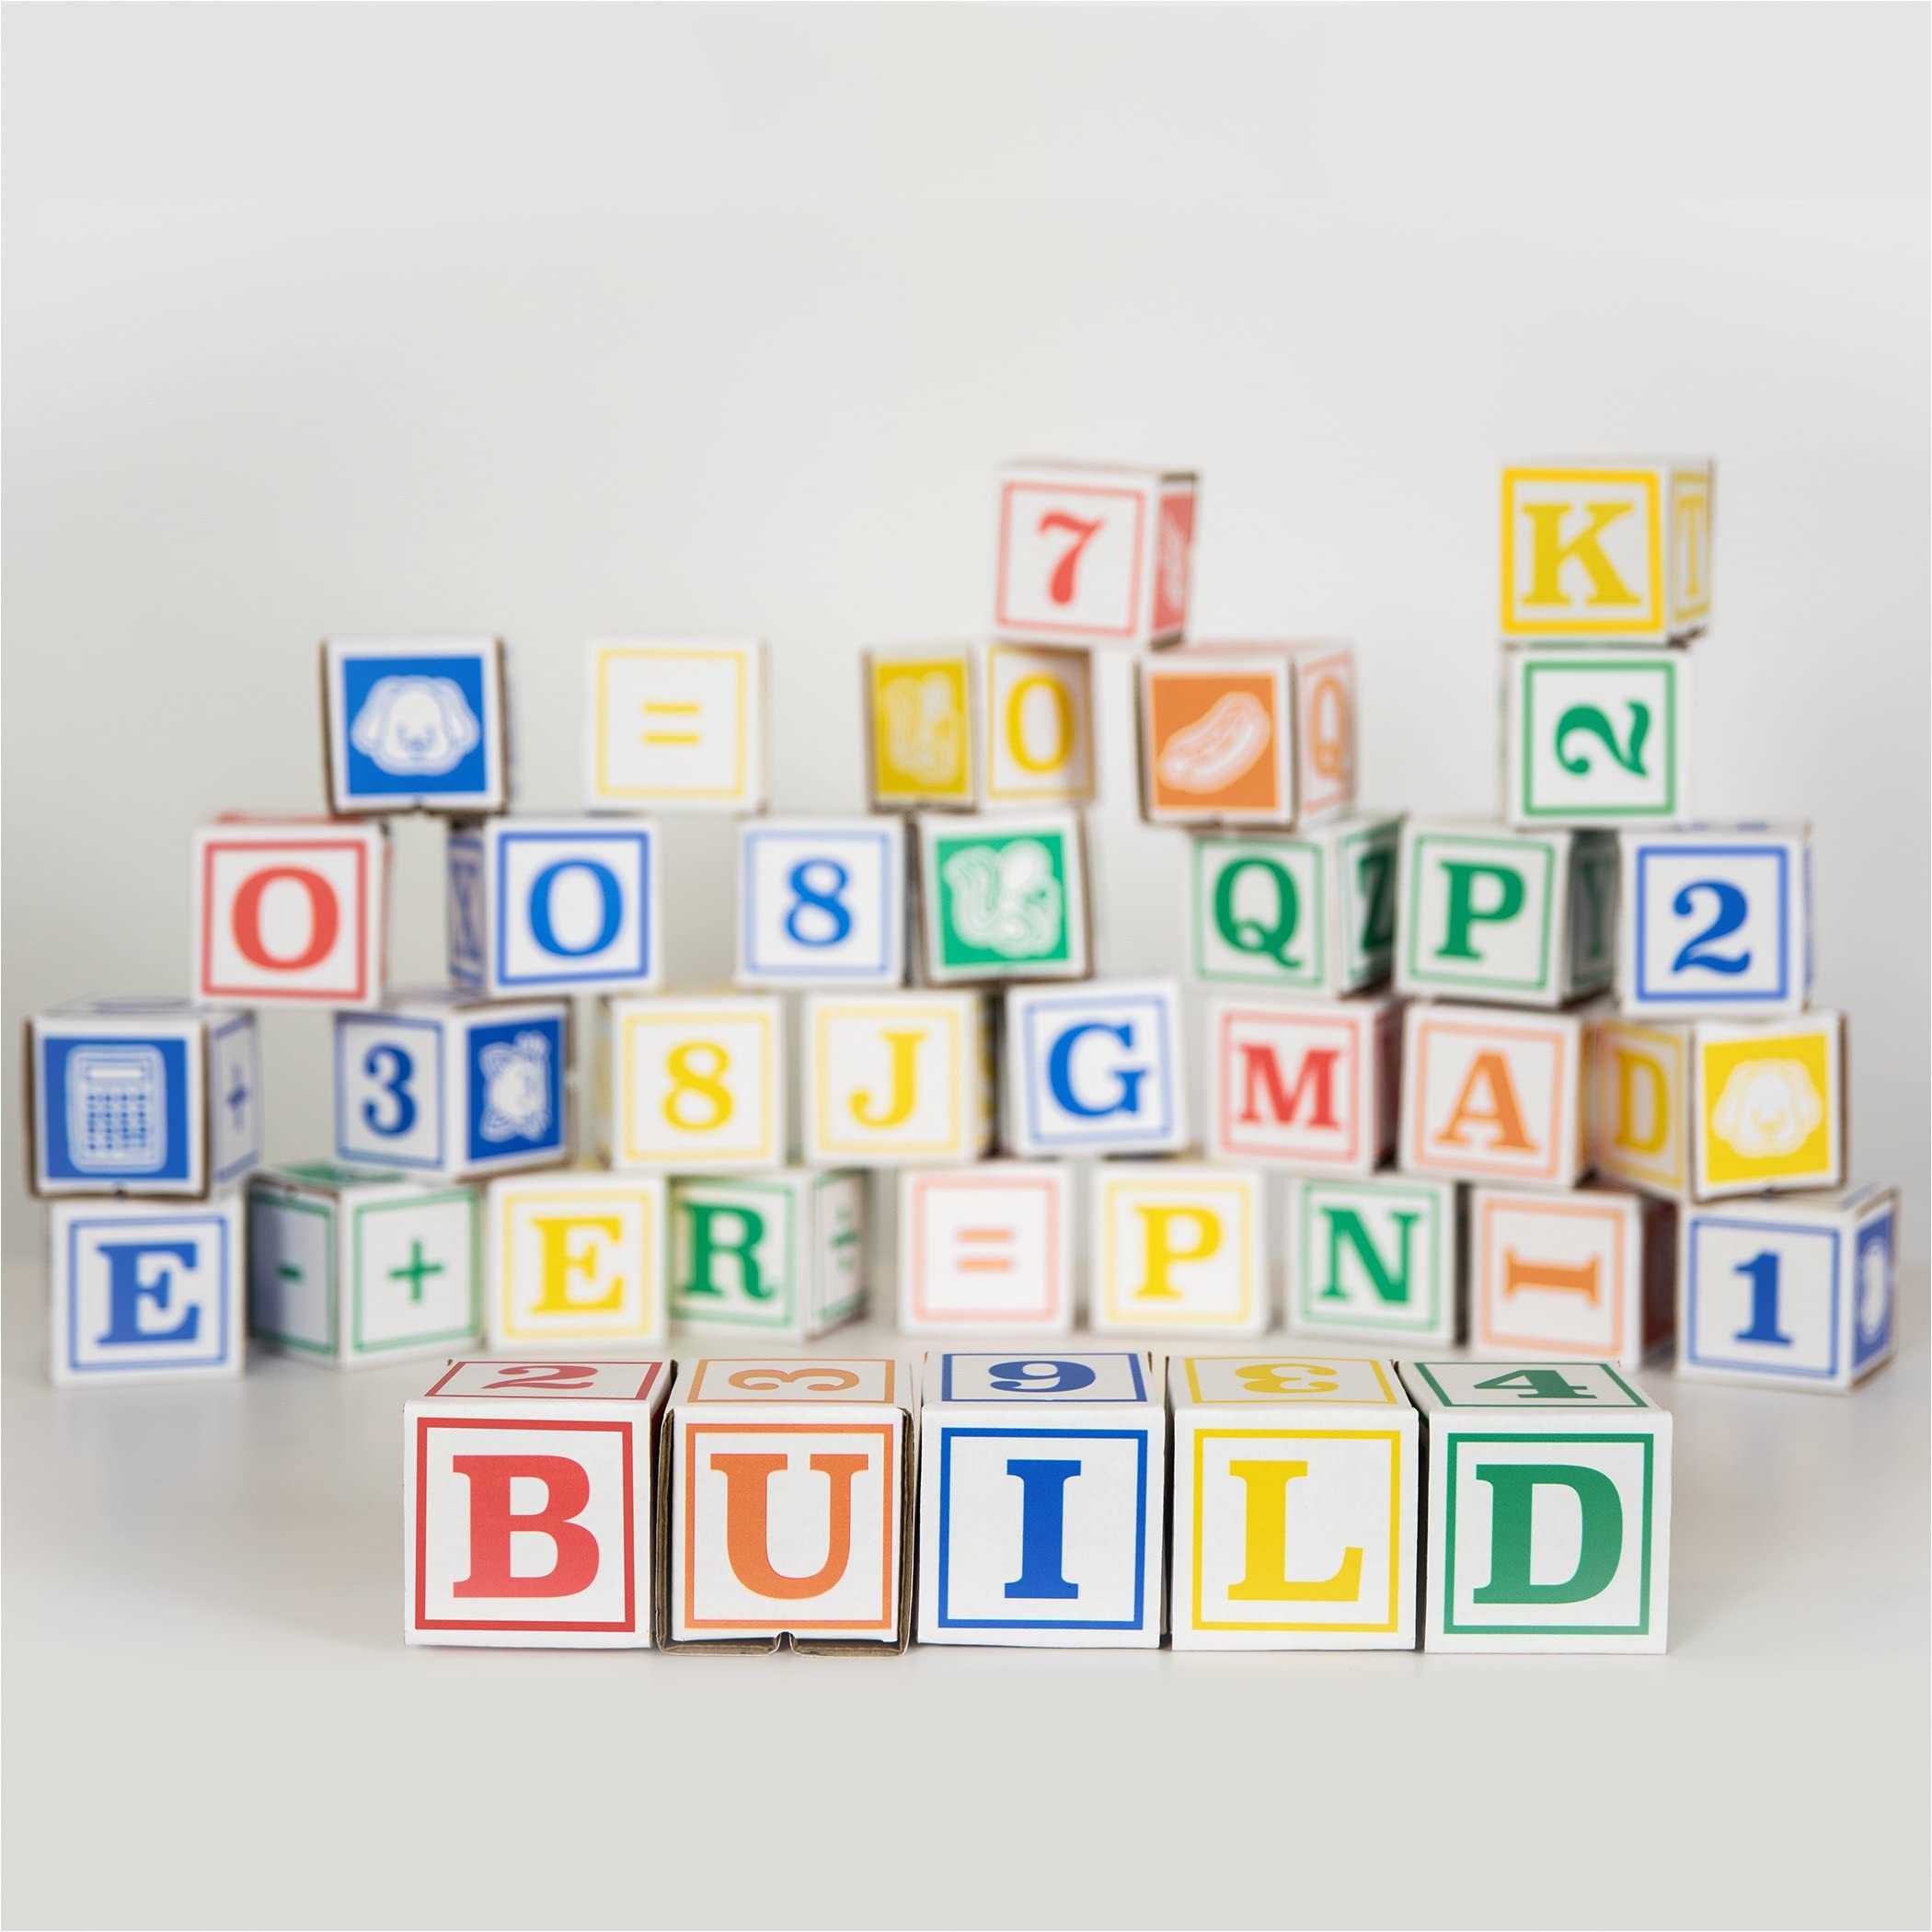 Bankers Box at Play Cardboard ABC/123 Building Learning Blocks, 50 Pack, Larger 3